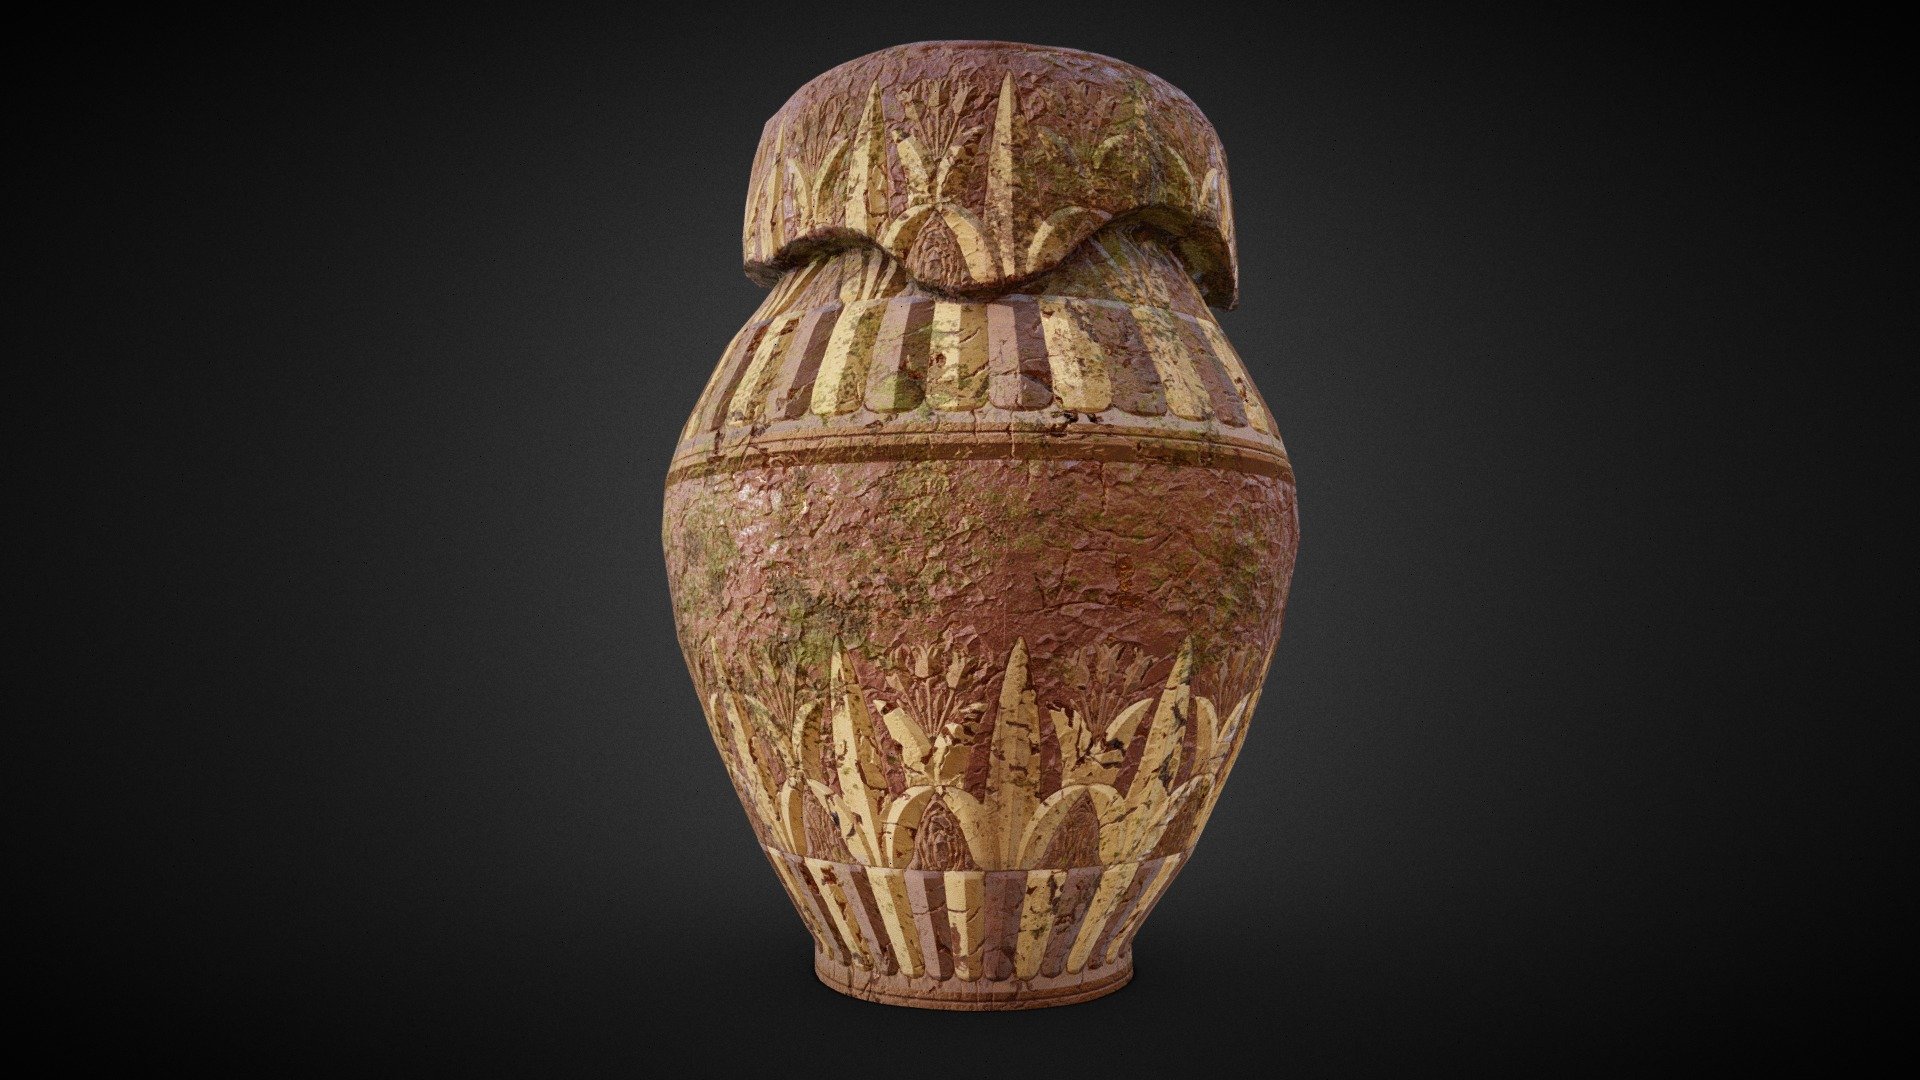 This 3D model represents an exquisite ancient vase. This 3D model is optimized for augmented reality (AR), virtual reality (VR), and web applications, allowing users to experience the vase in immersive digital environments. The model’s high level of detail ensures a realistic and captivating experience, bringing the ancient world to life 3d model